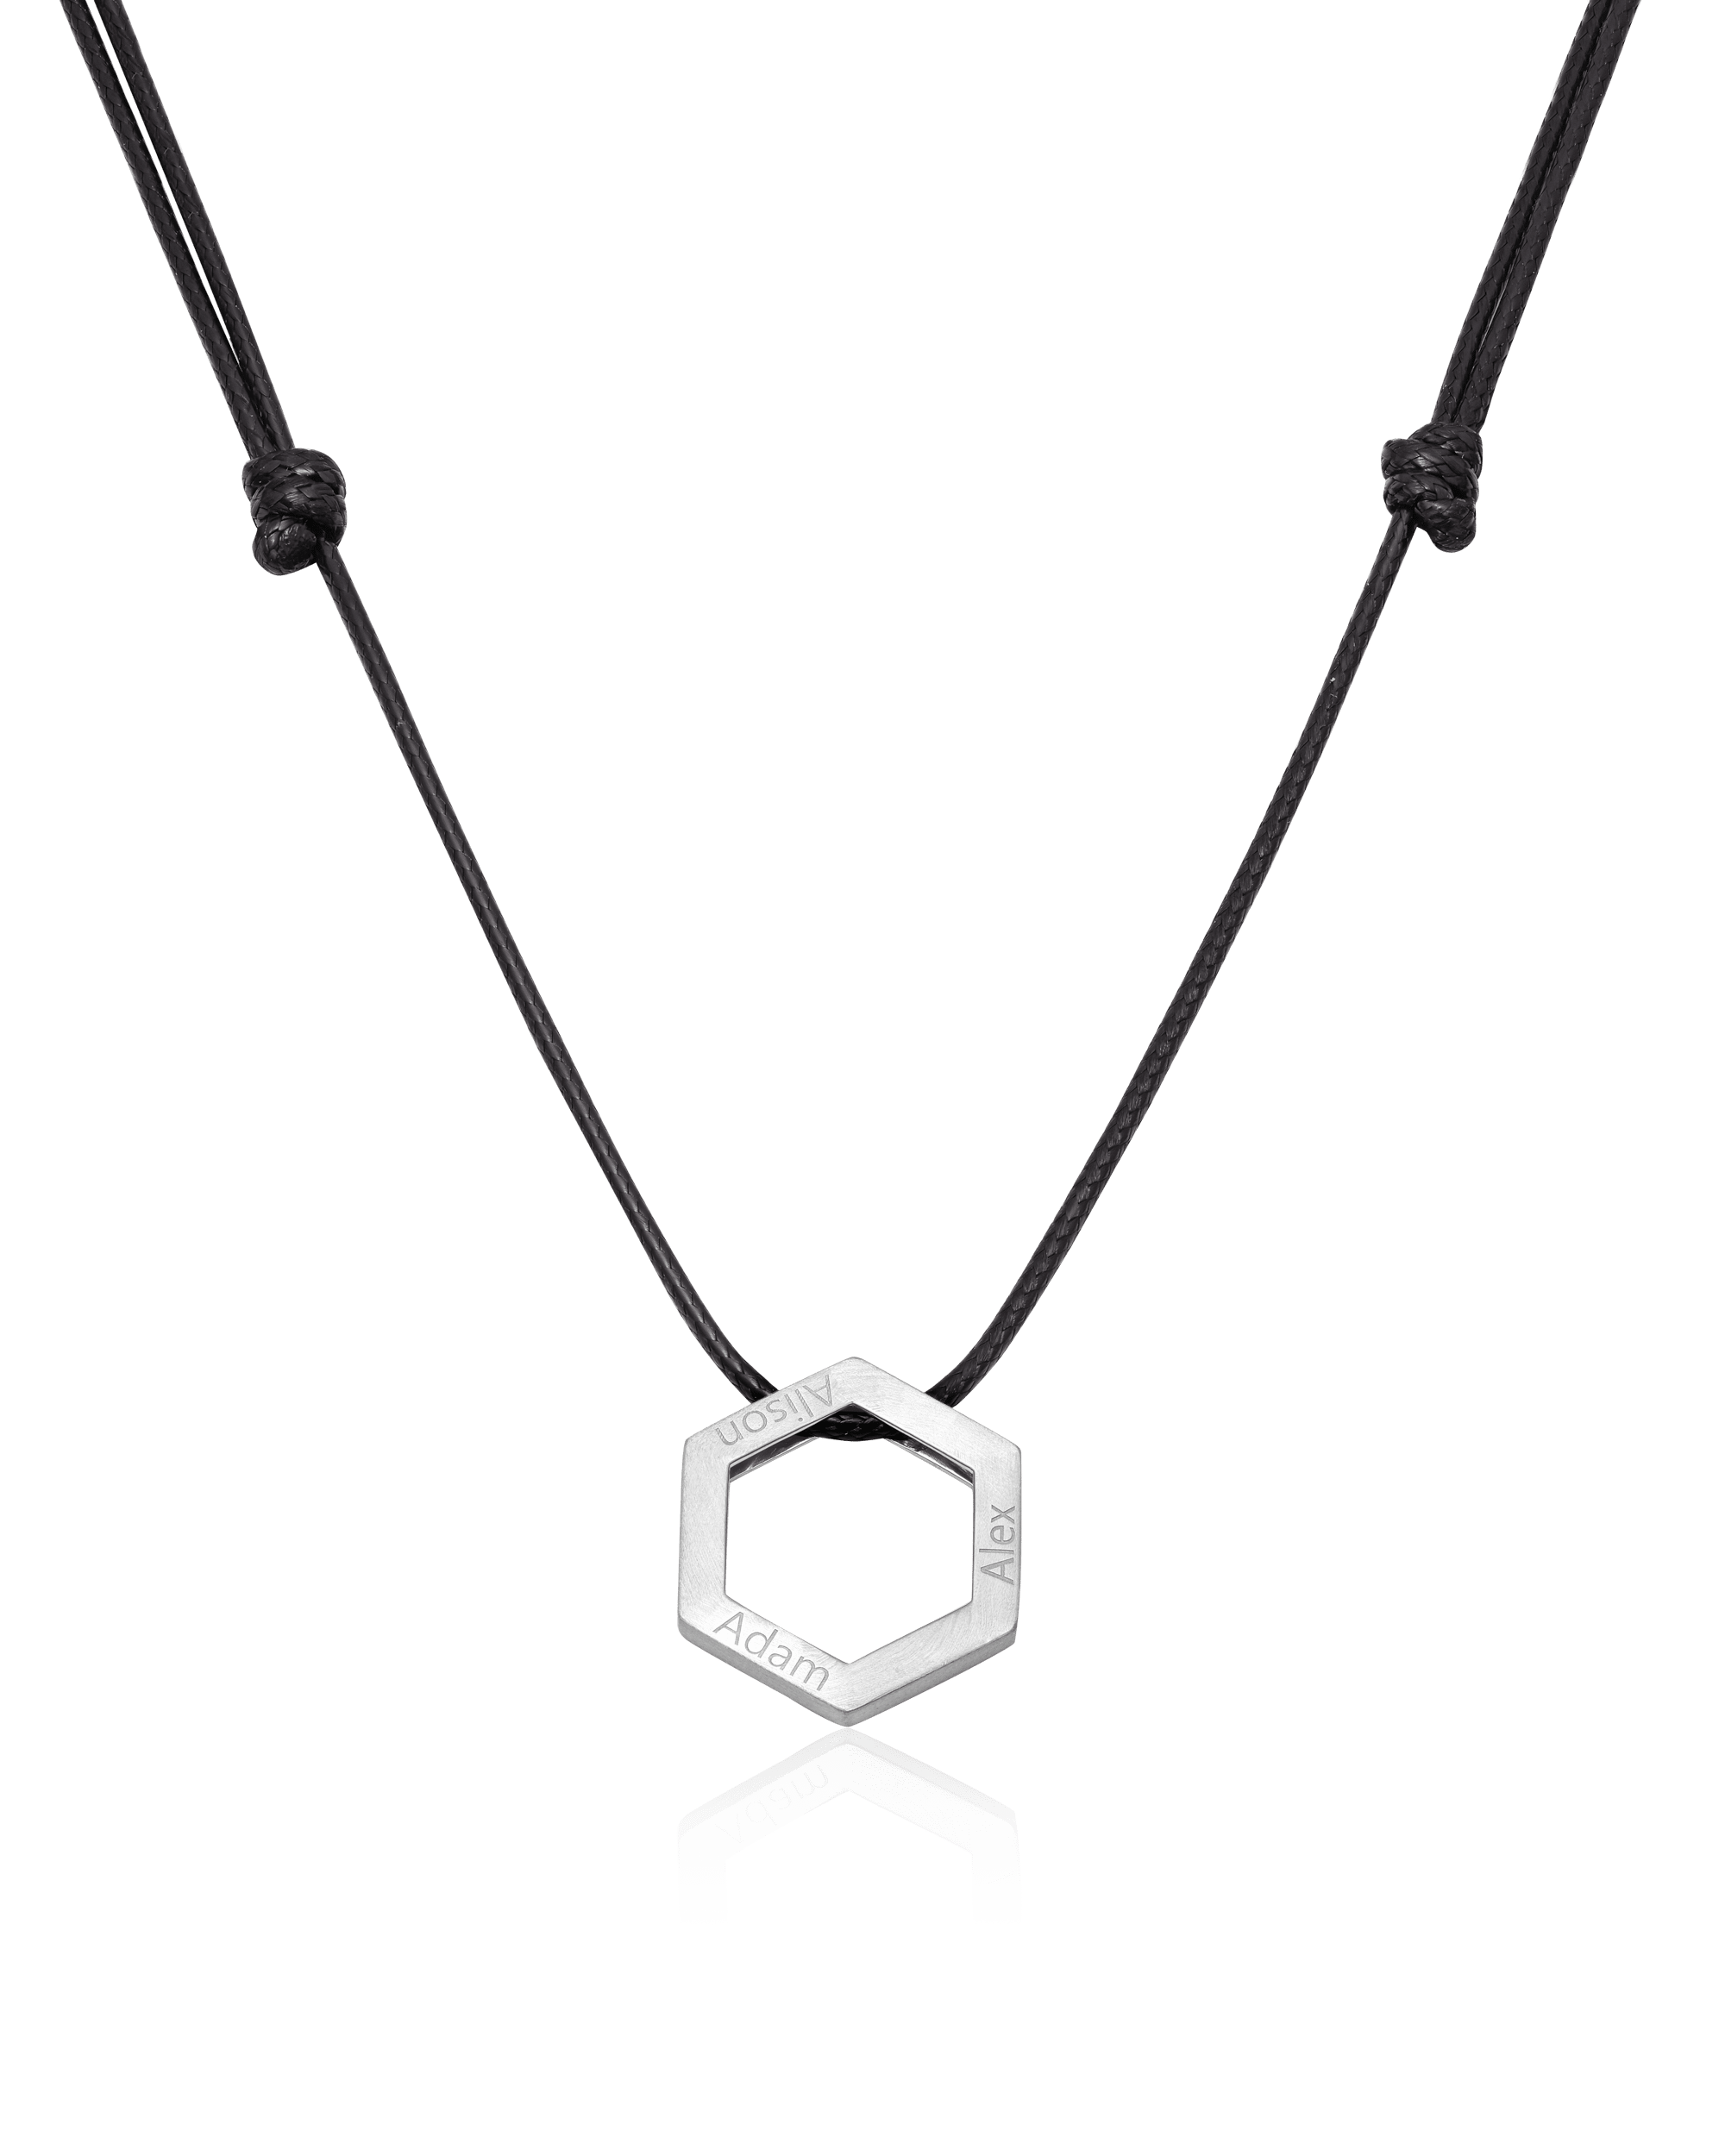 Honeycomb Necklace - 925 Sterling Silver Necklaces magal-dev Black 1 Name Adjustable Cord Chain 20"-24"